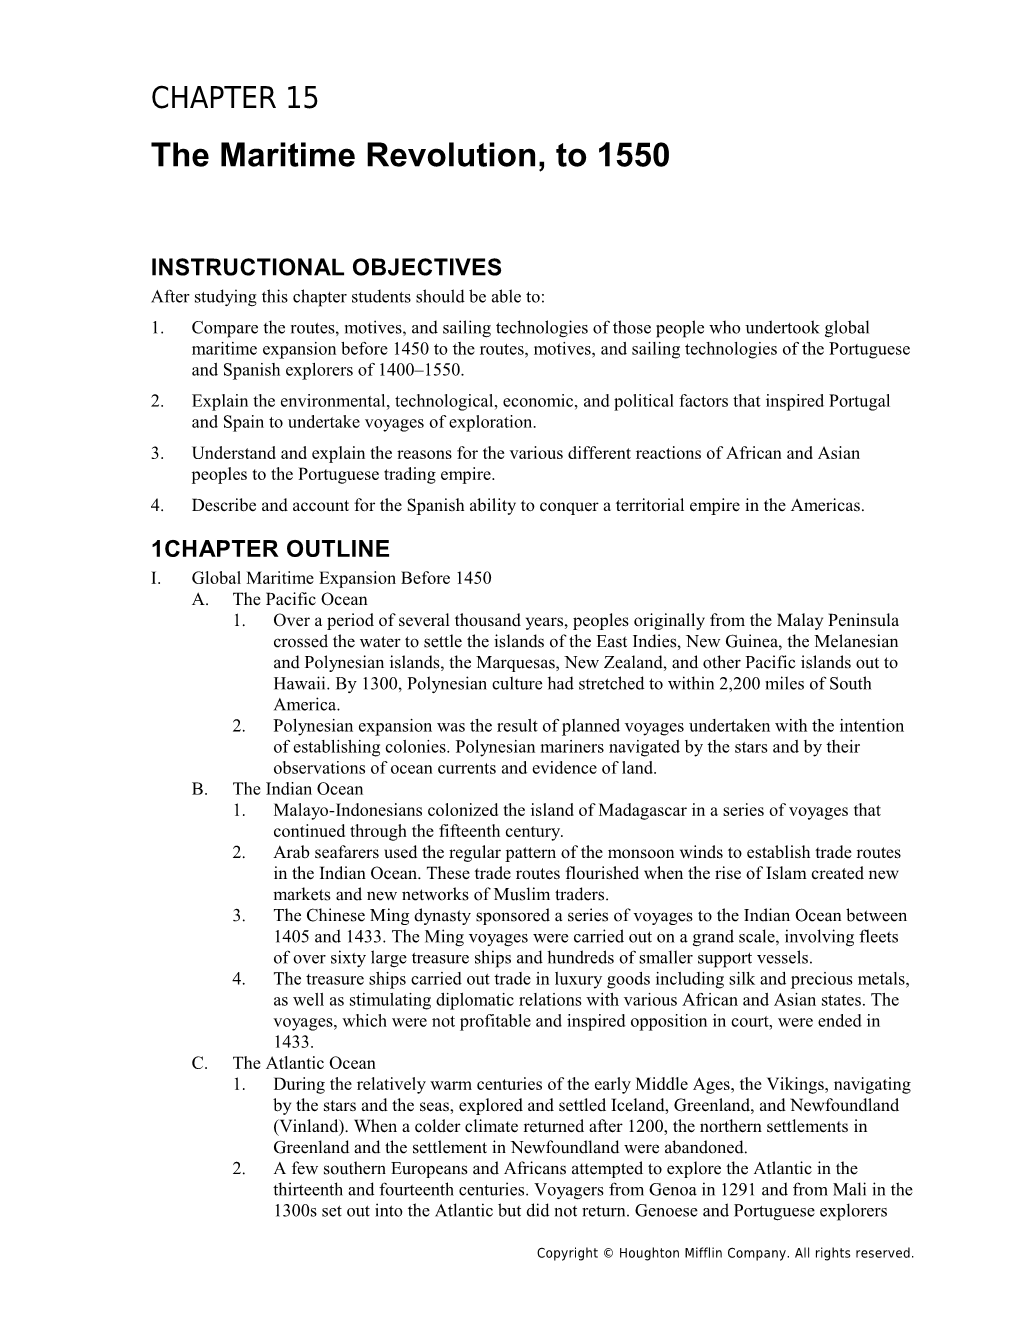 Chapter 16: the Maritime Revolution, to 1550 1